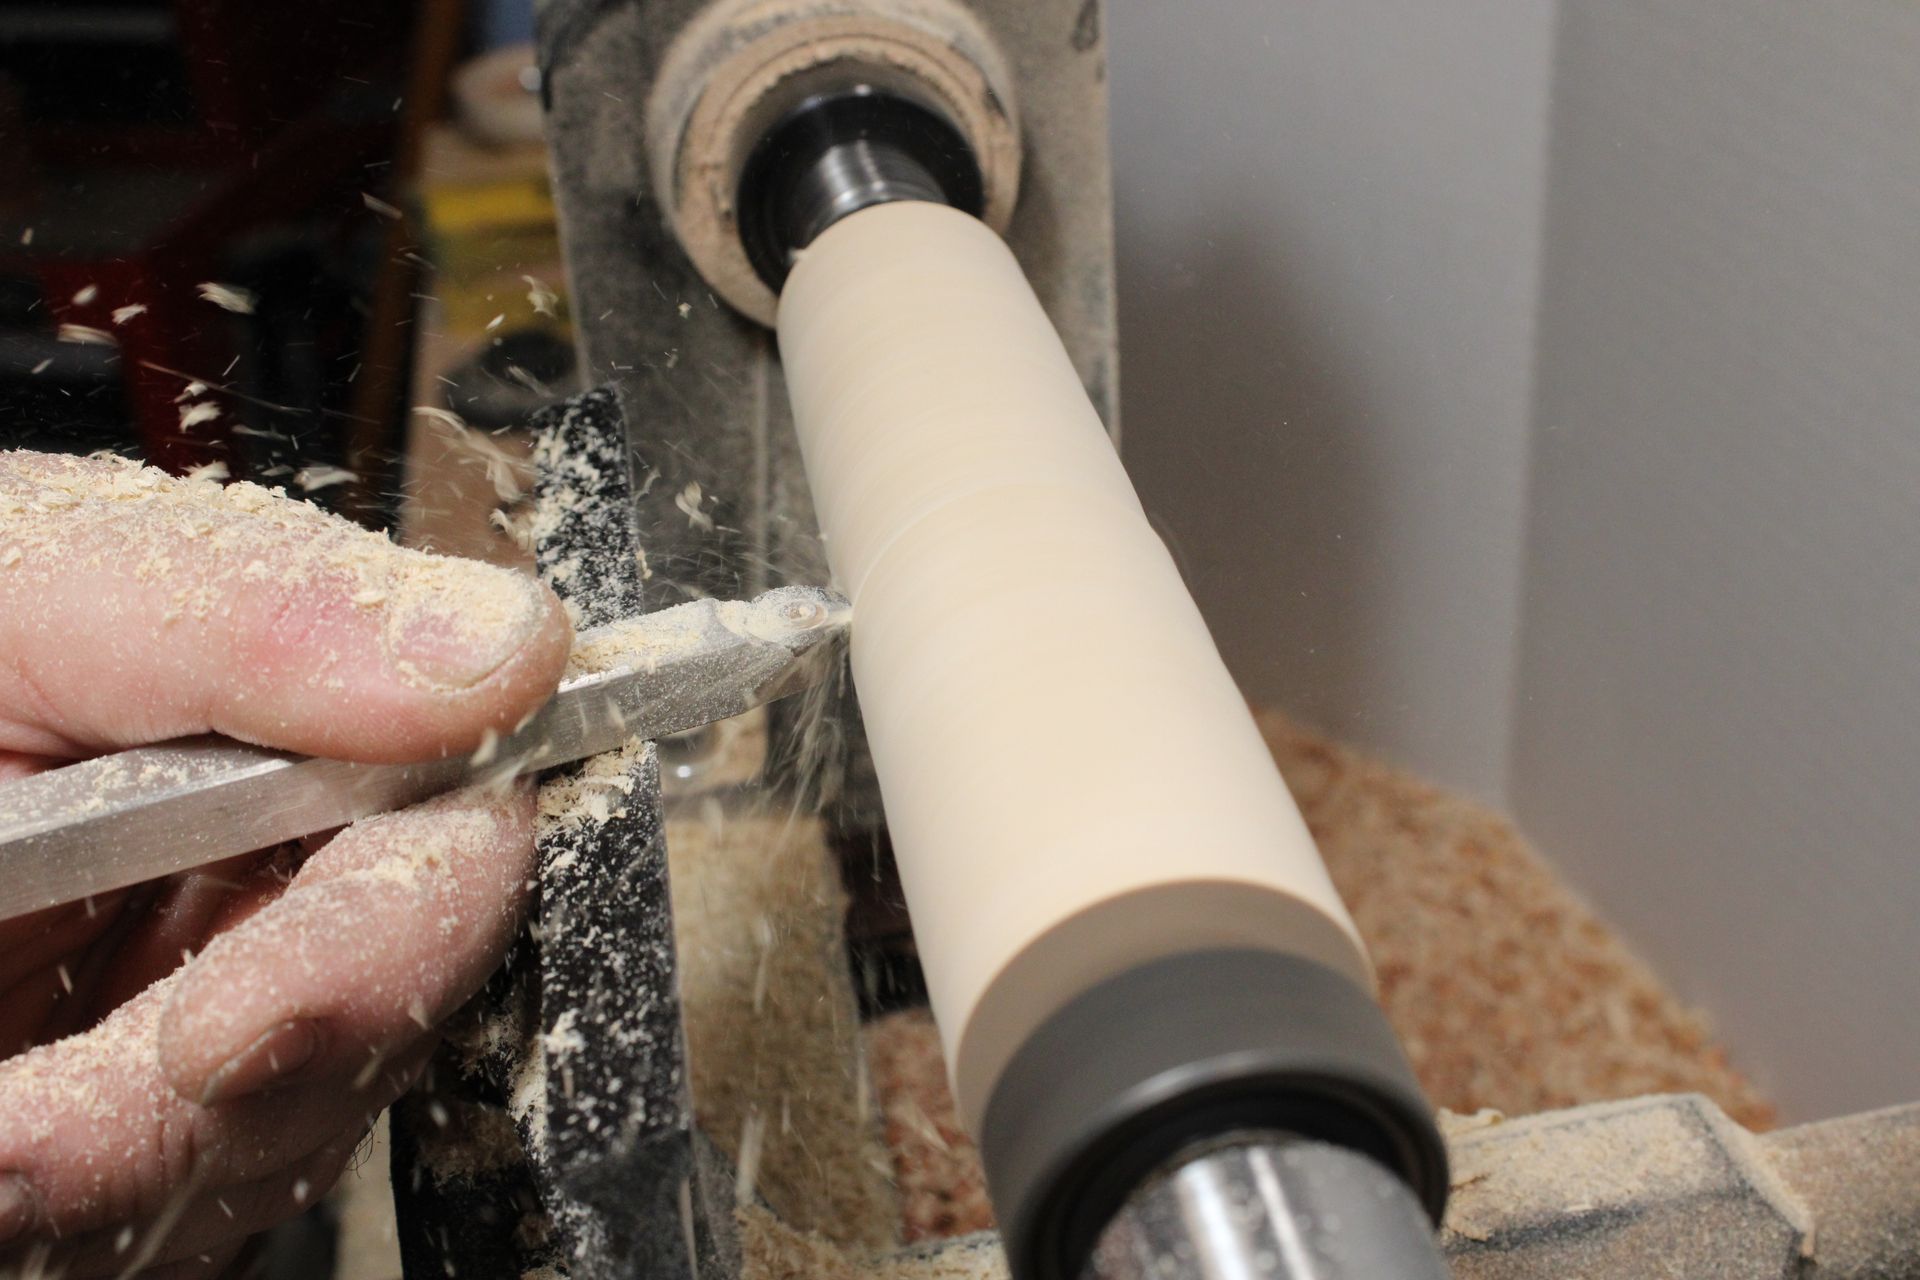 cutting a long piece of wood into a pestle